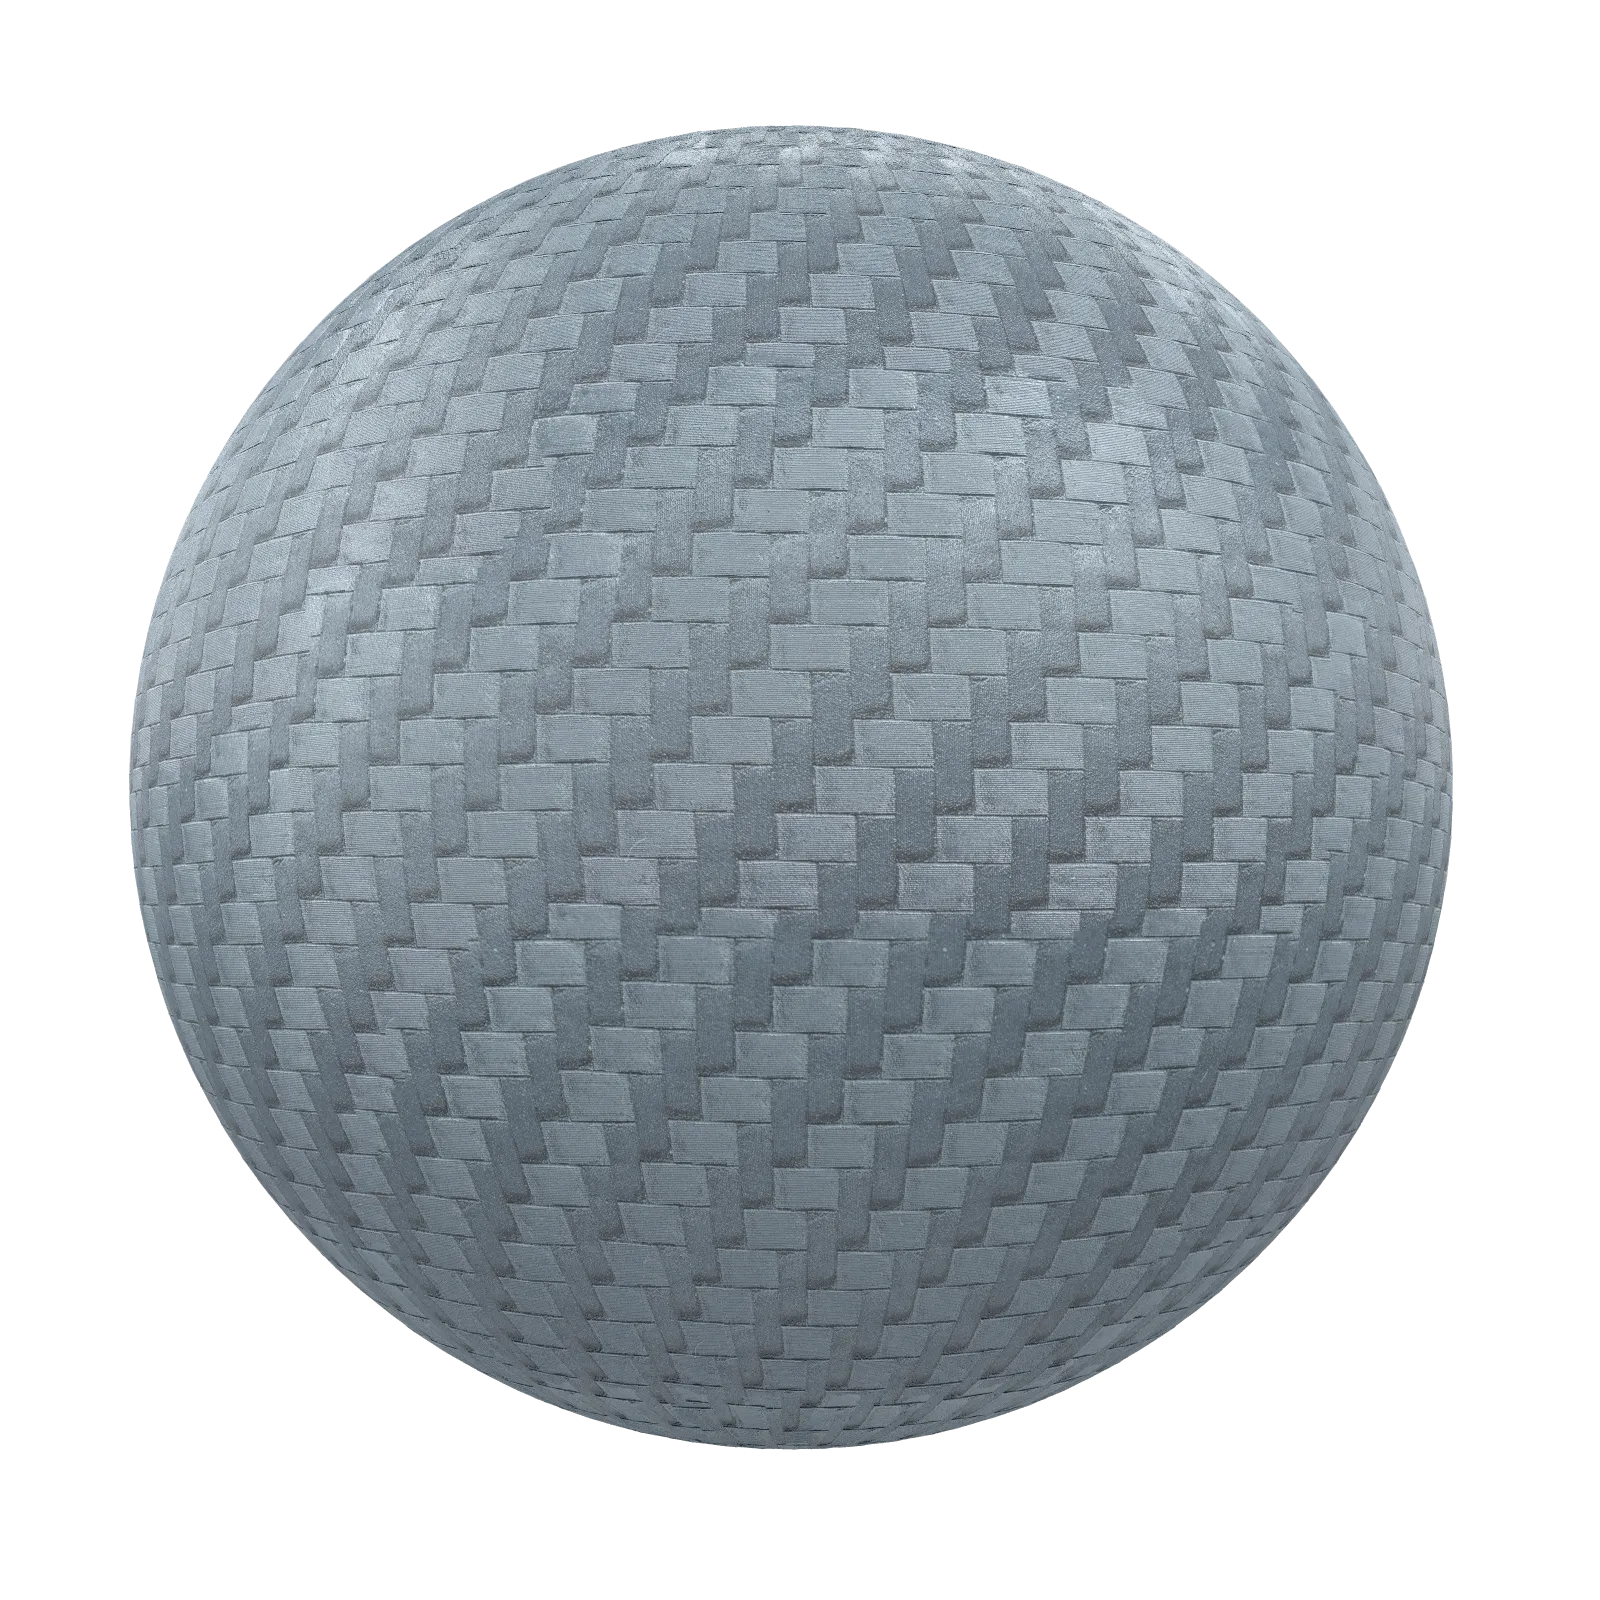 PBR CGAXIS TEXTURES – METALS – Patterned Metal Grid 01